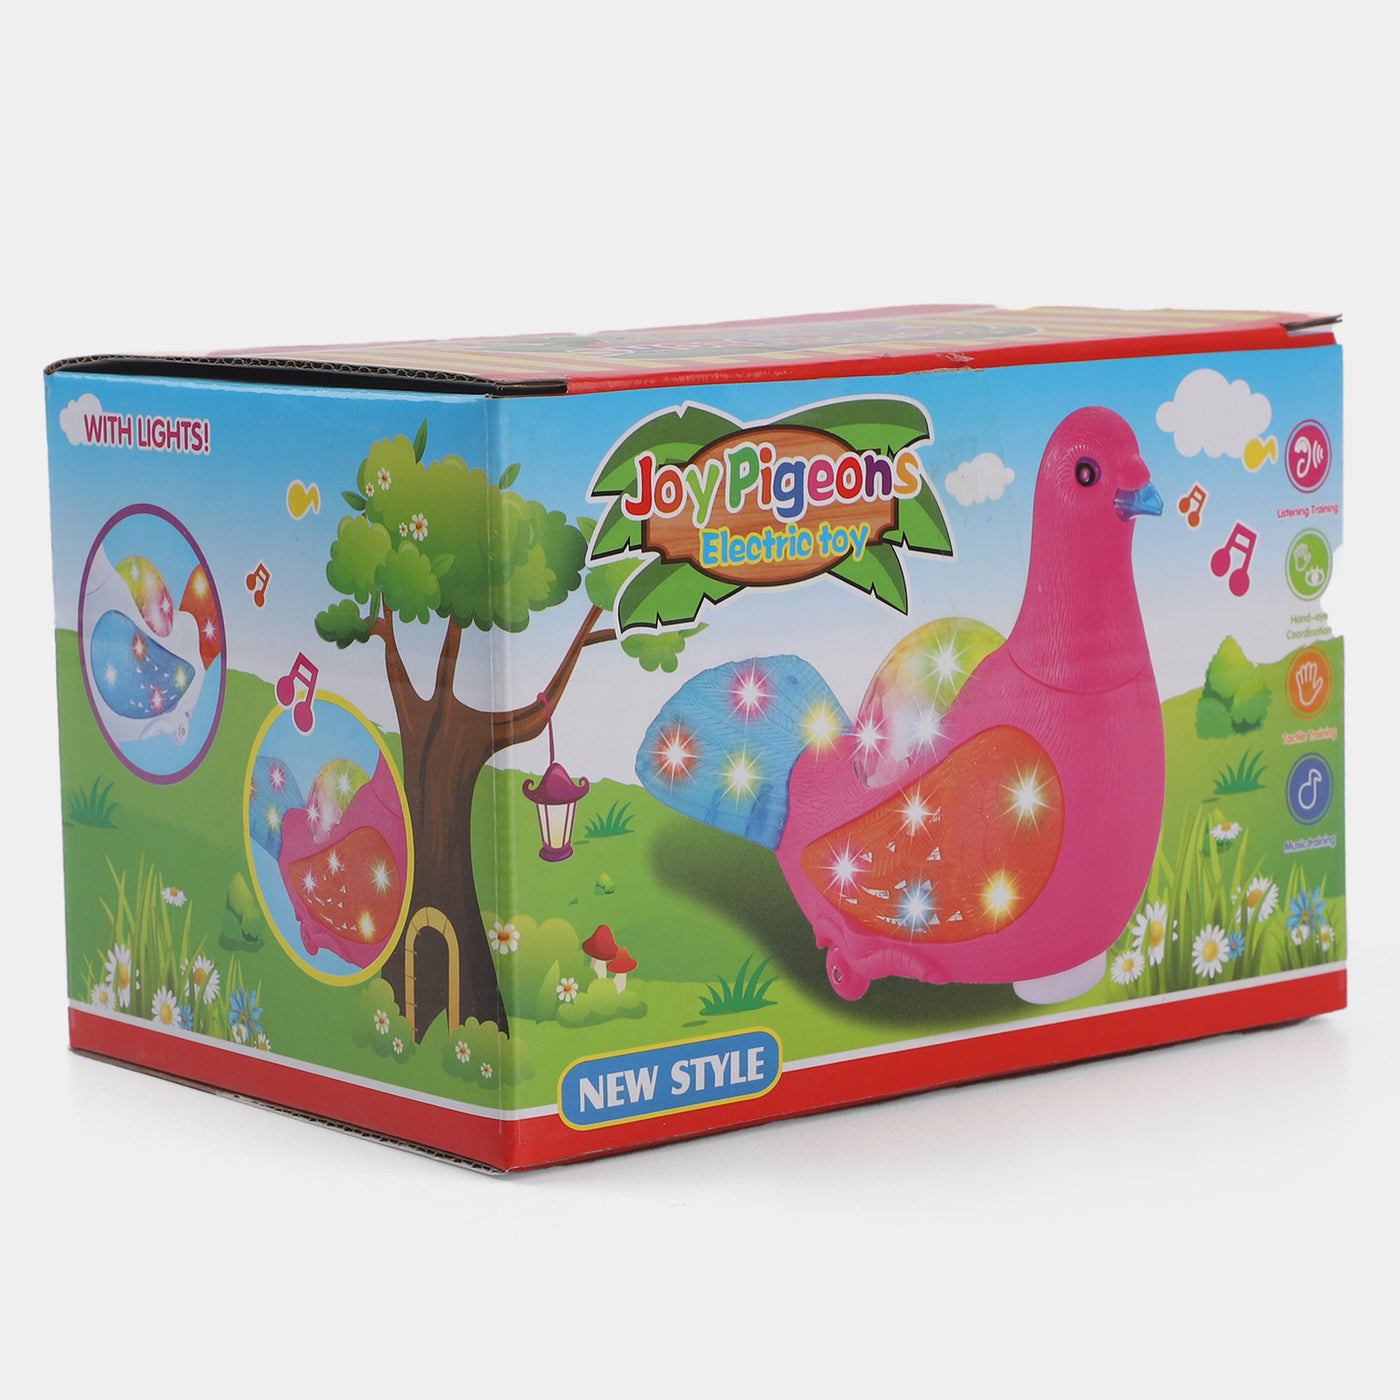 Electric Pigeon Toy for Kids